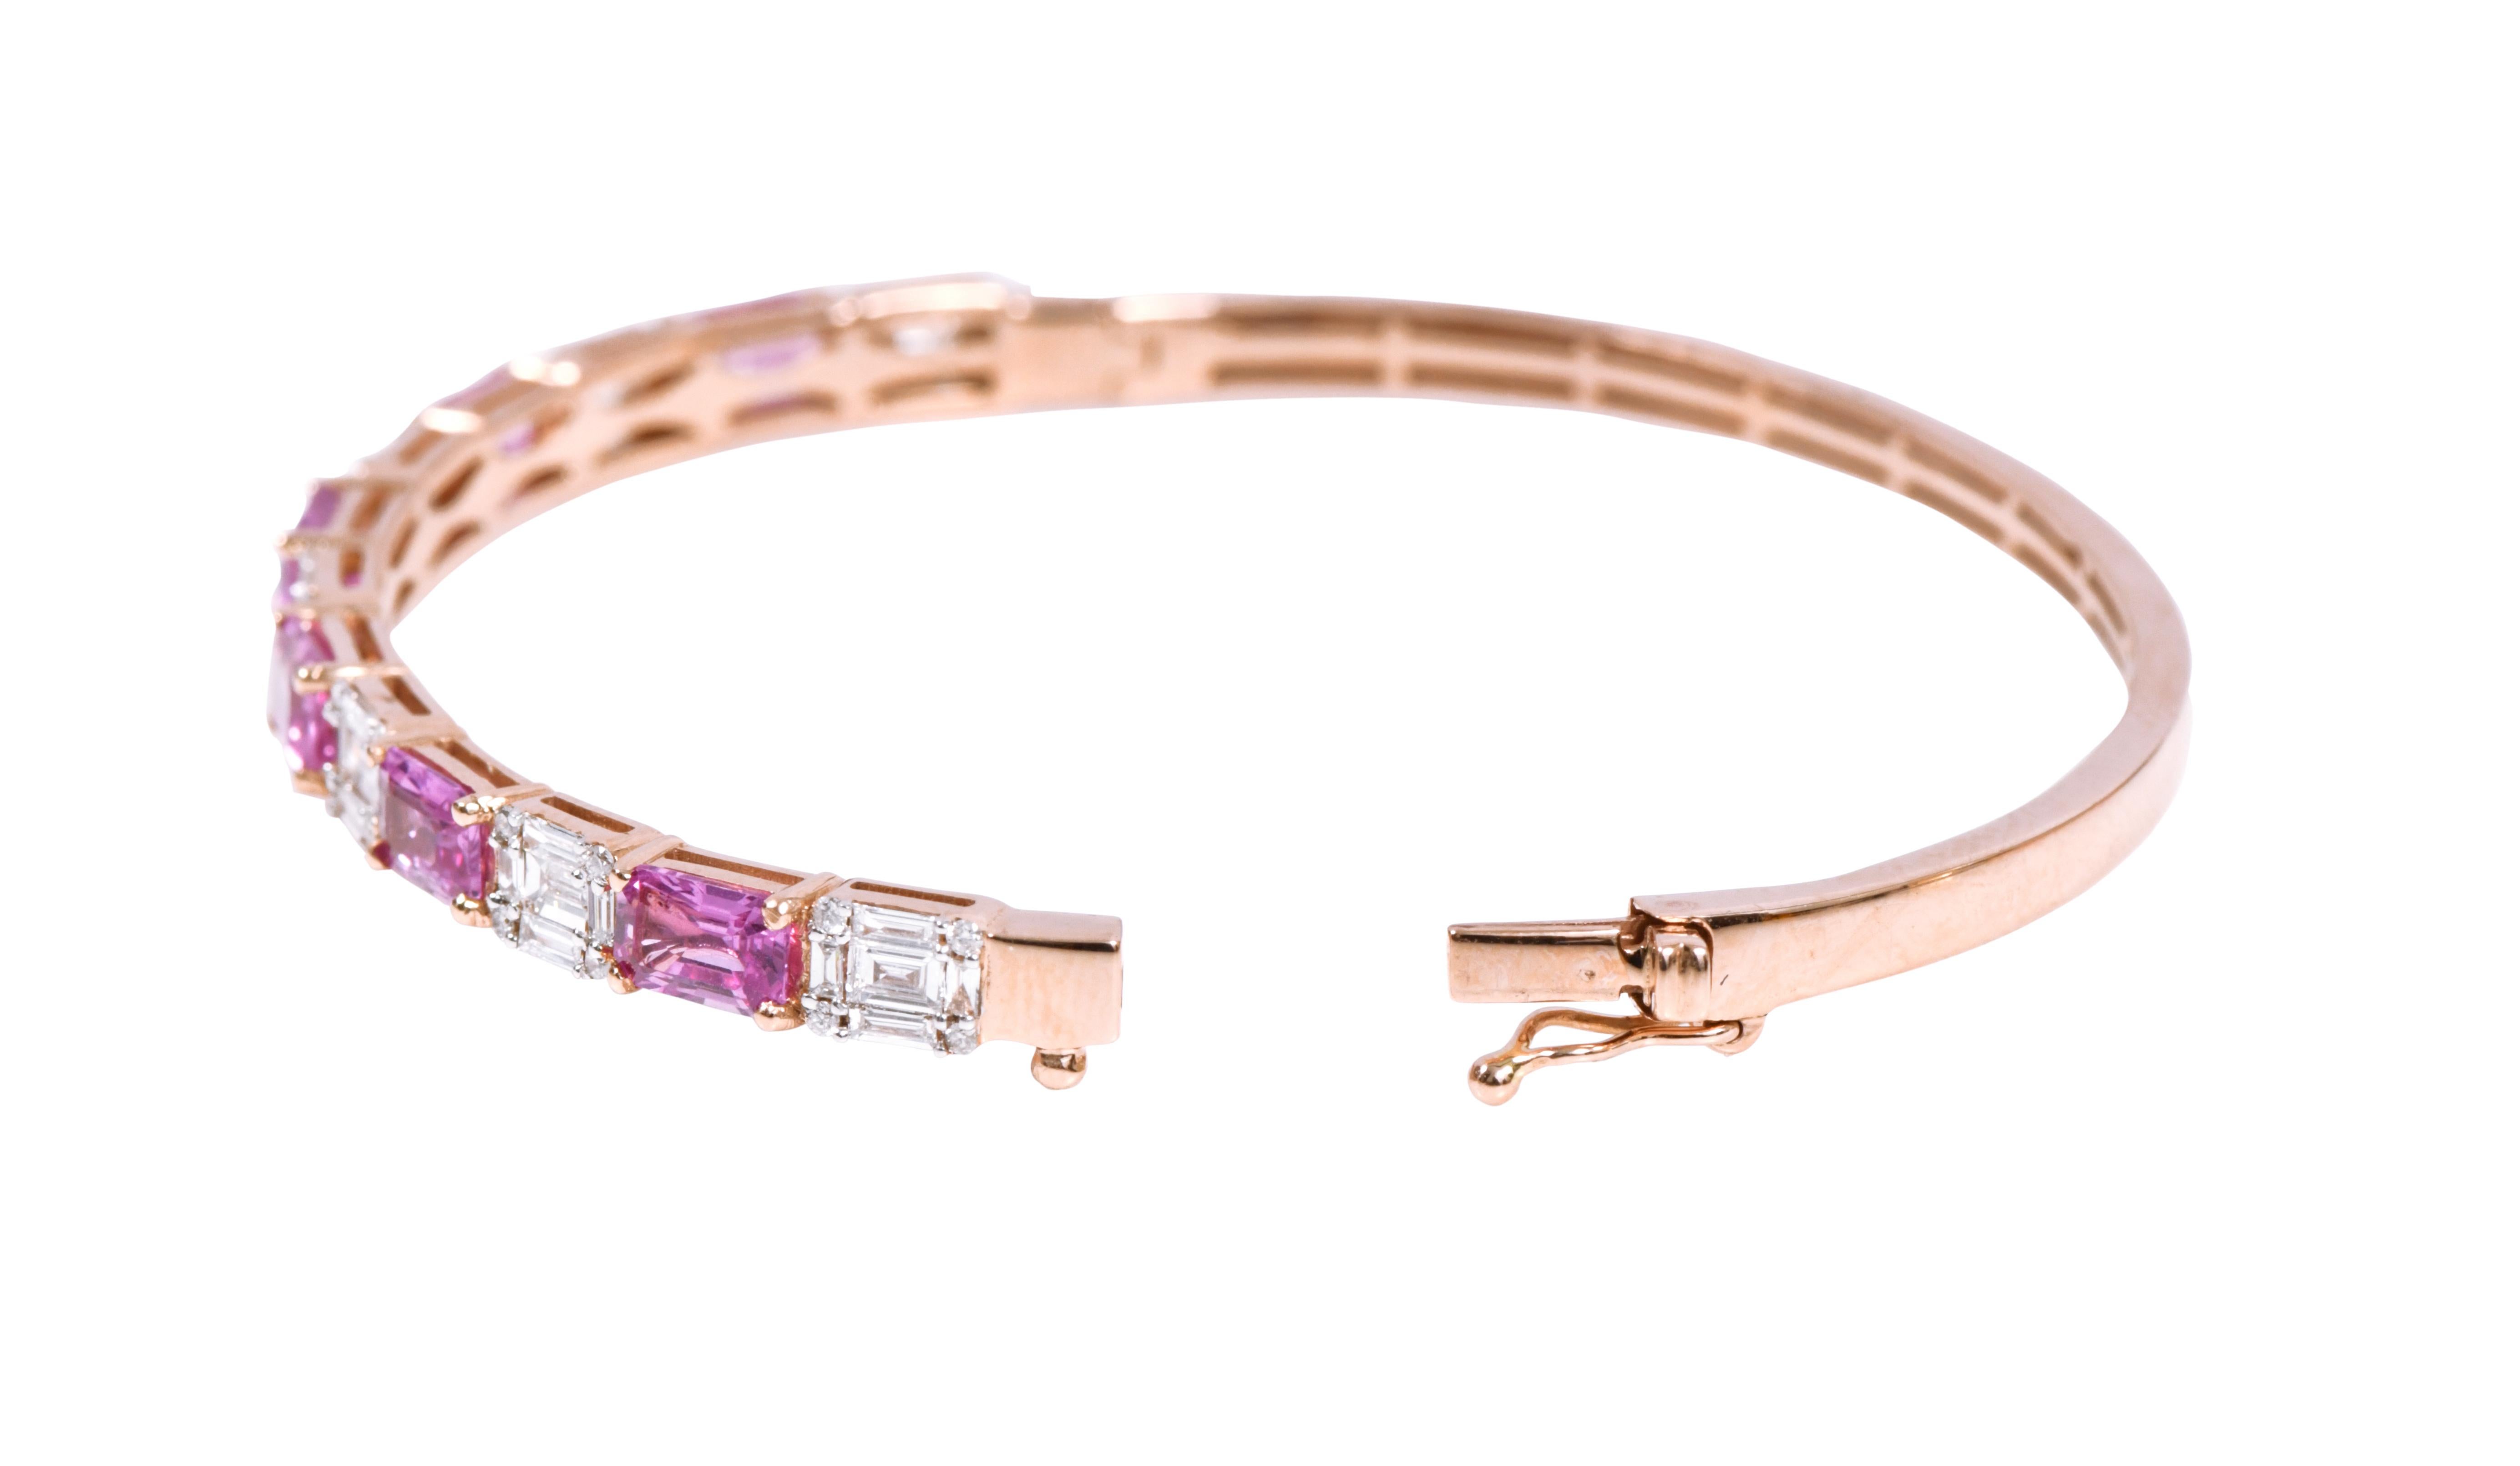 Contemporary 18 Karat White Gold 5.41 Carat Pink Sapphire and Diamond Bangle For Sale